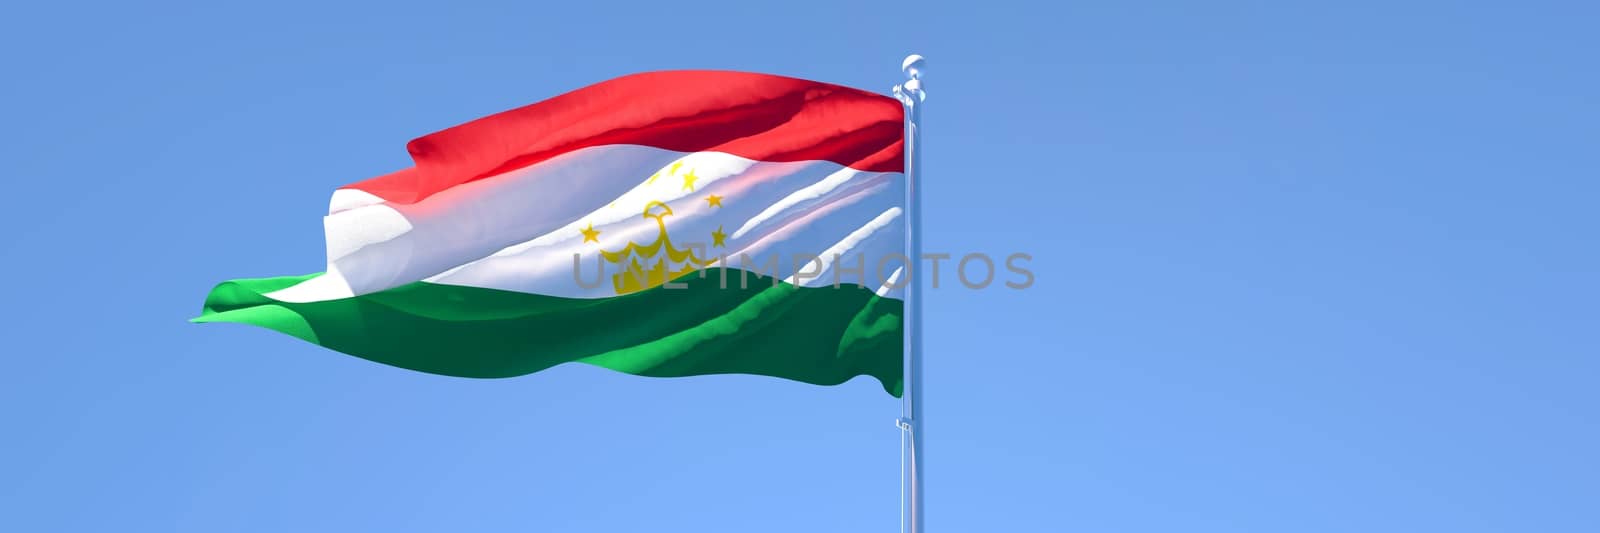 3D rendering of the national flag of Tajikistan waving in the wind against a blue sky